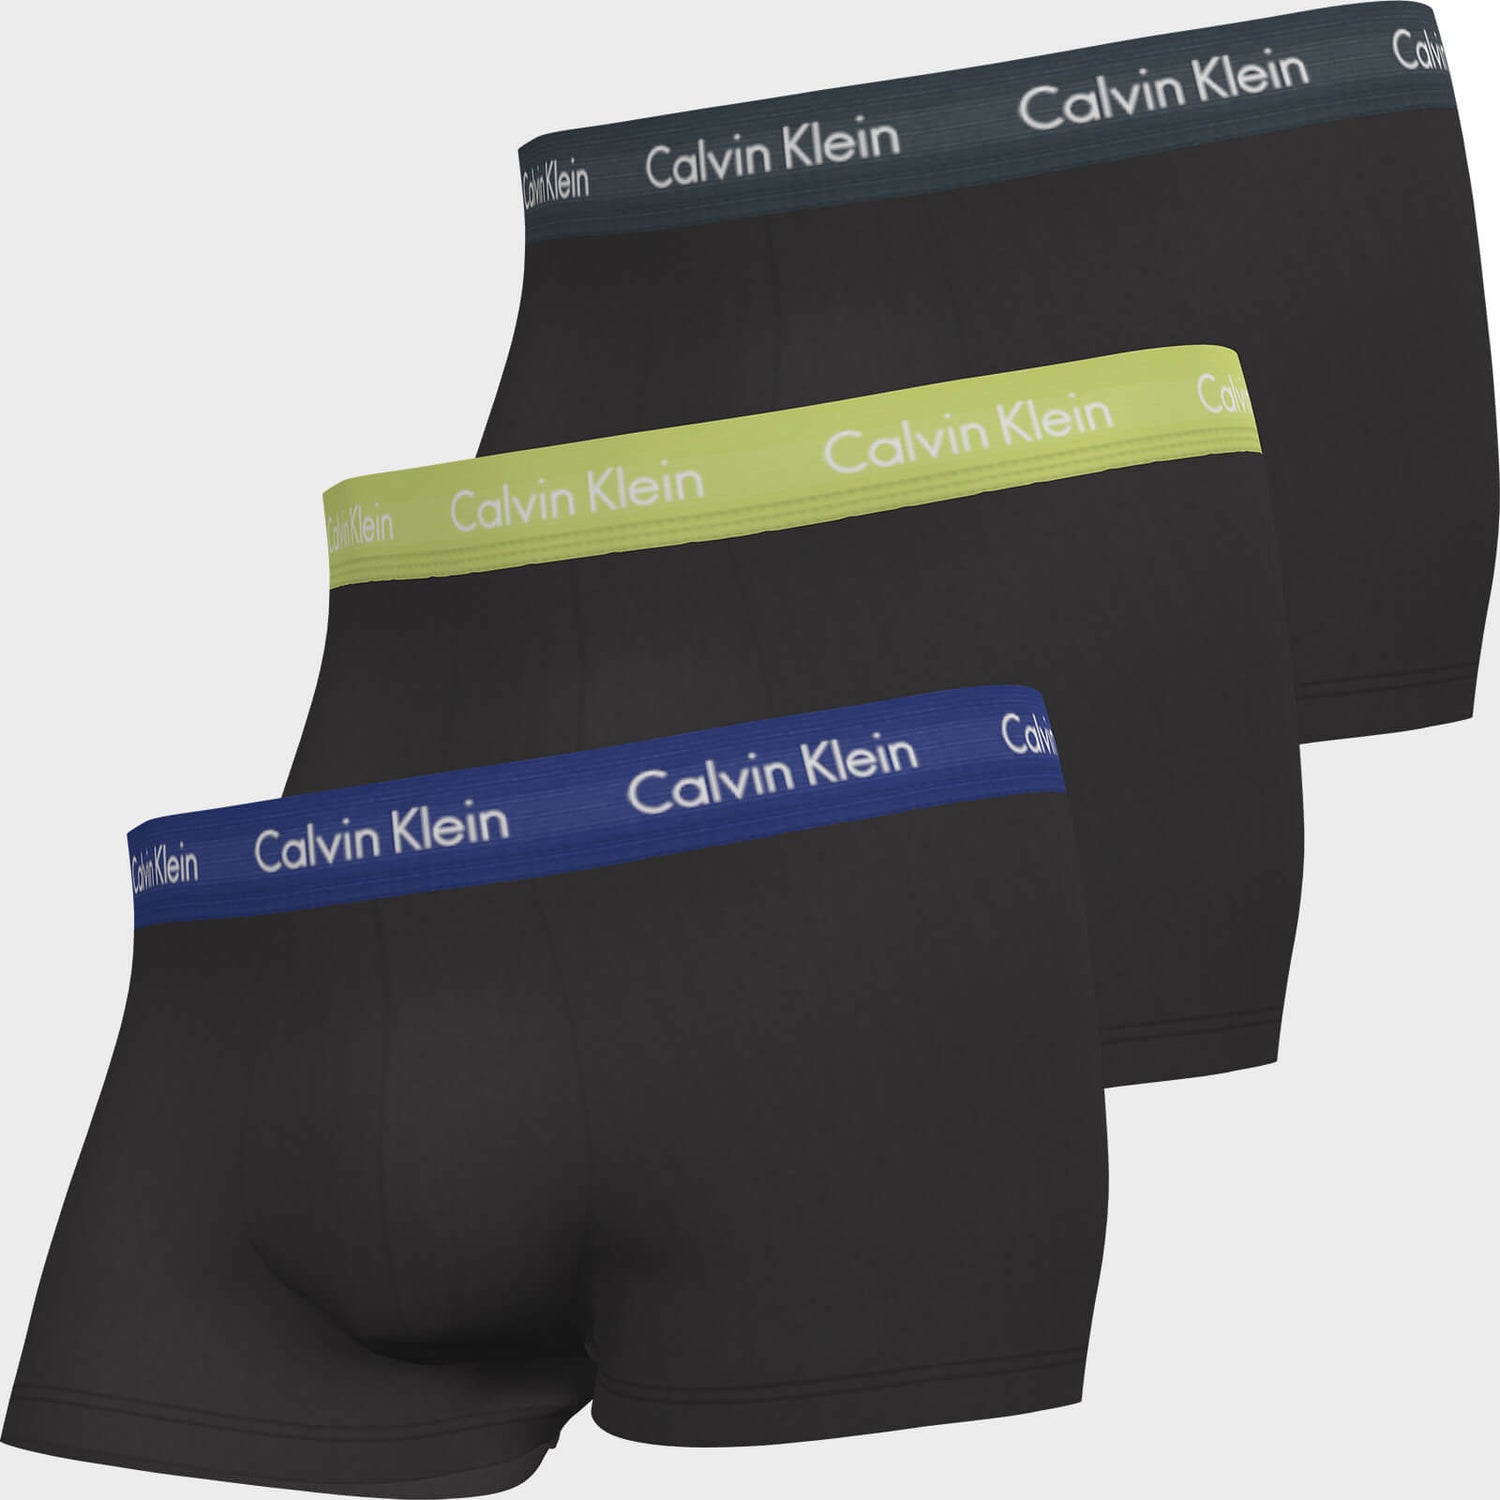 Calvin Klein Men's Cotton Stretch Low Rise 3 Pack Trunks with Contrast Waistband - B-Hemisphere/Direct Green/Blue Flan